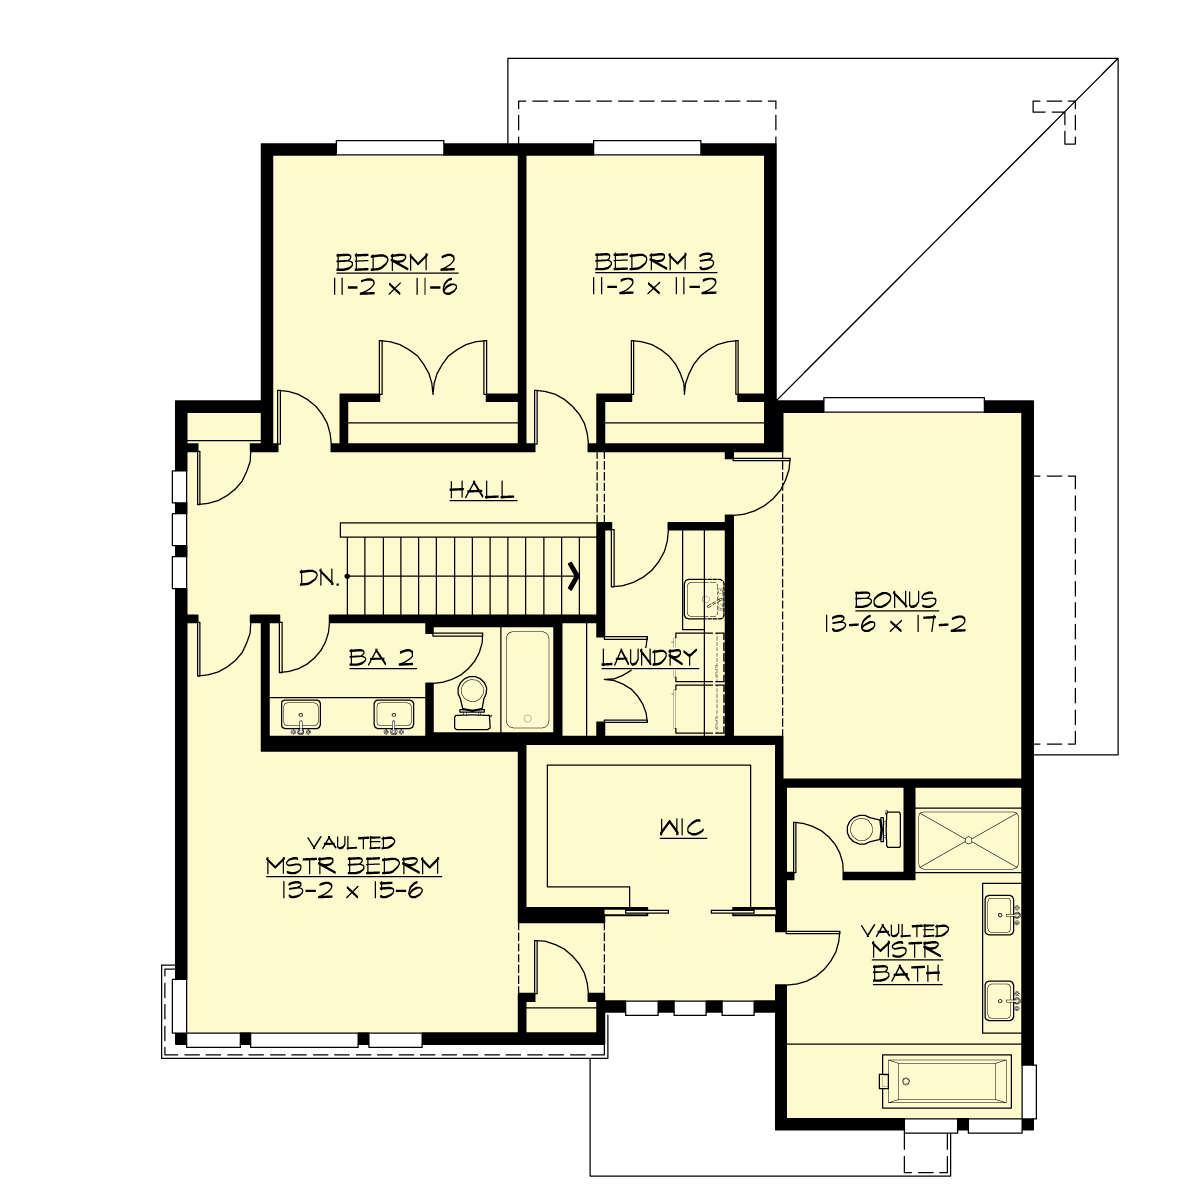 3Bedrooms, 2.5Bath Contemporary House Plan with